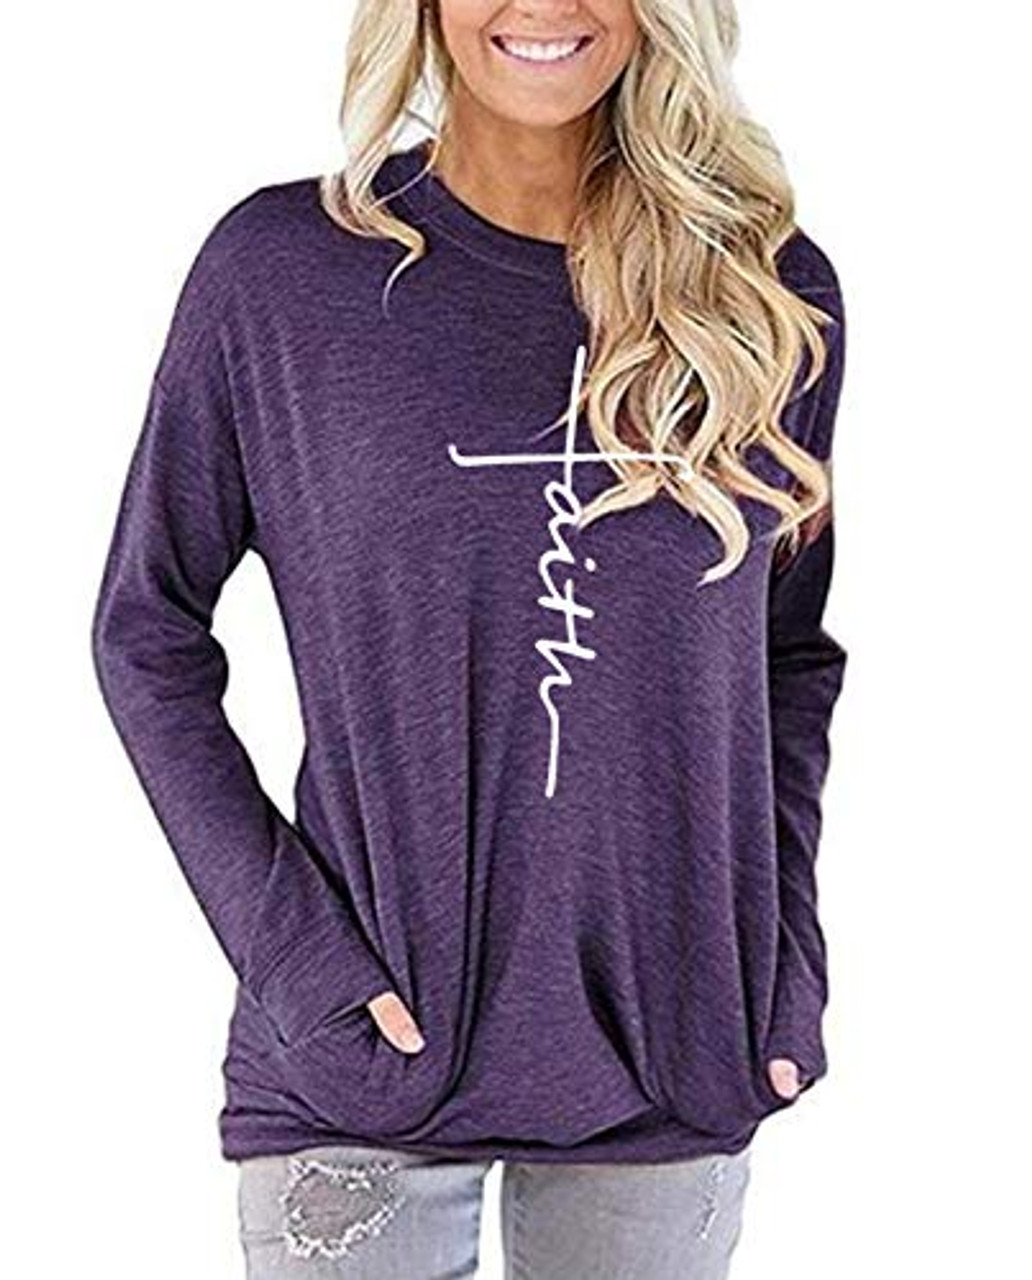 Details about   iChunhua Casual Women’s Long Sleeve Crewneck T Shirt Sweatshirt Tops with Pock 